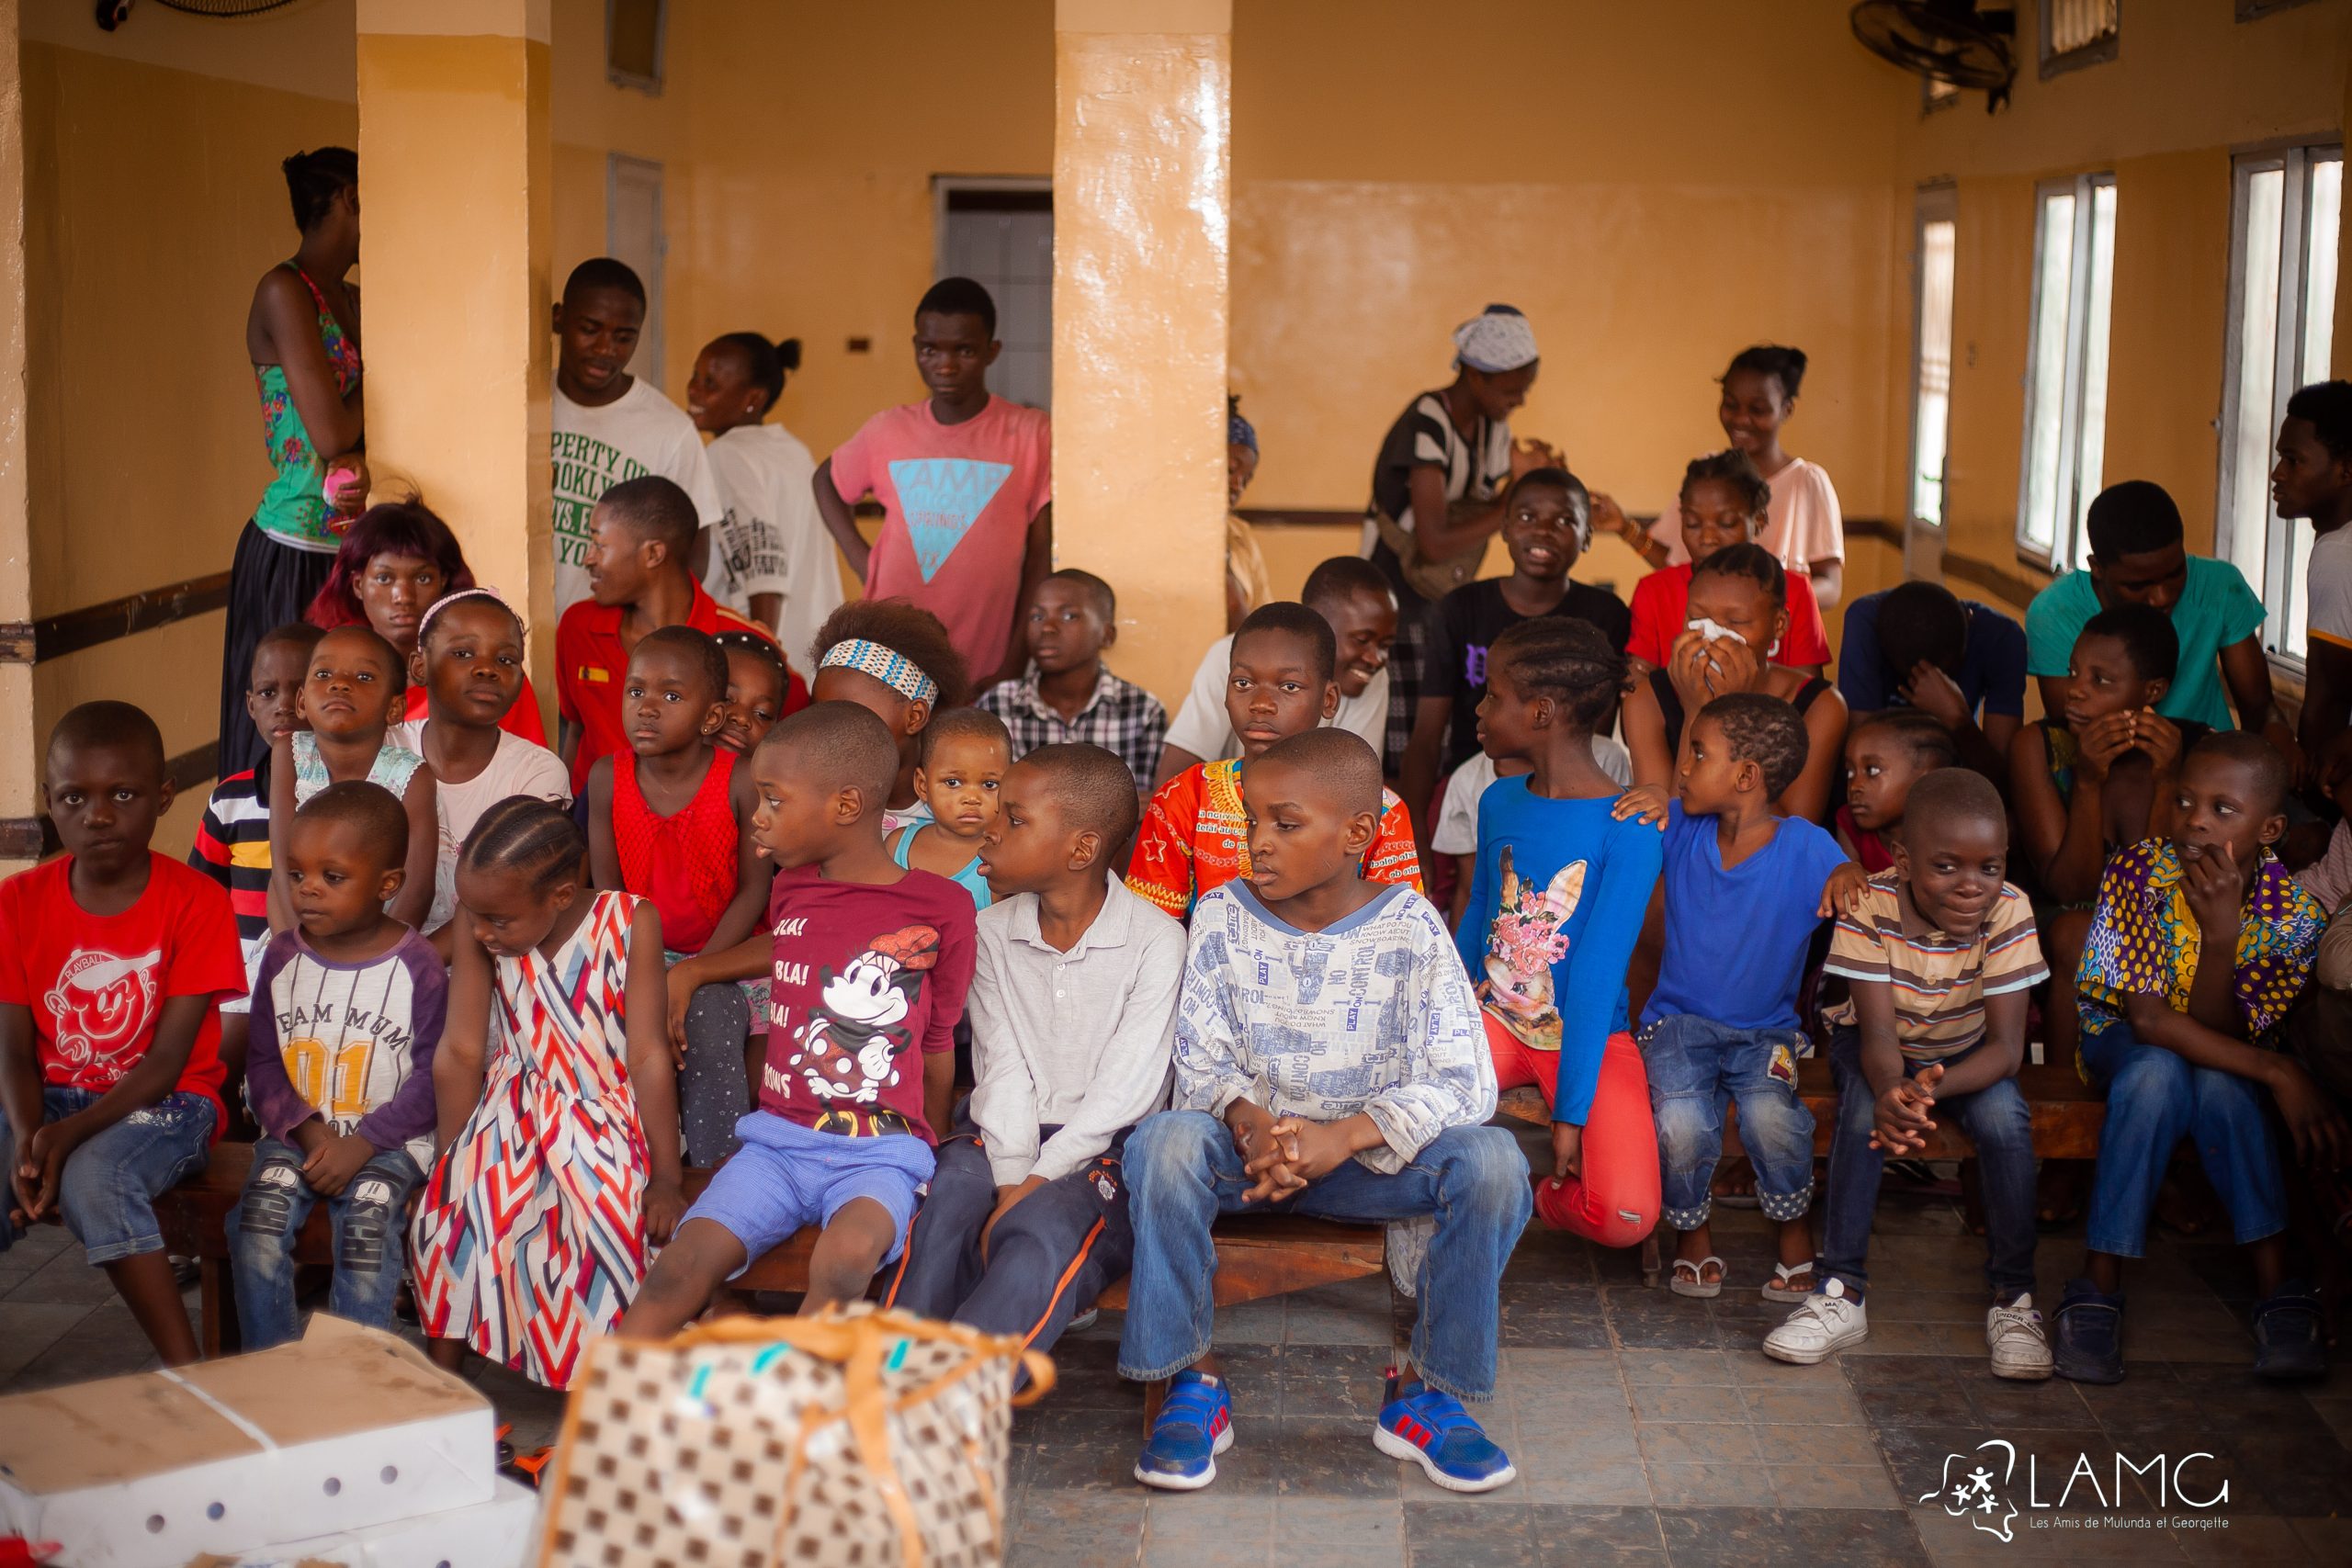 Taking advantage of her stay in kinshasa, our coordinator and her team visited the children of the ENRICA orphanage.